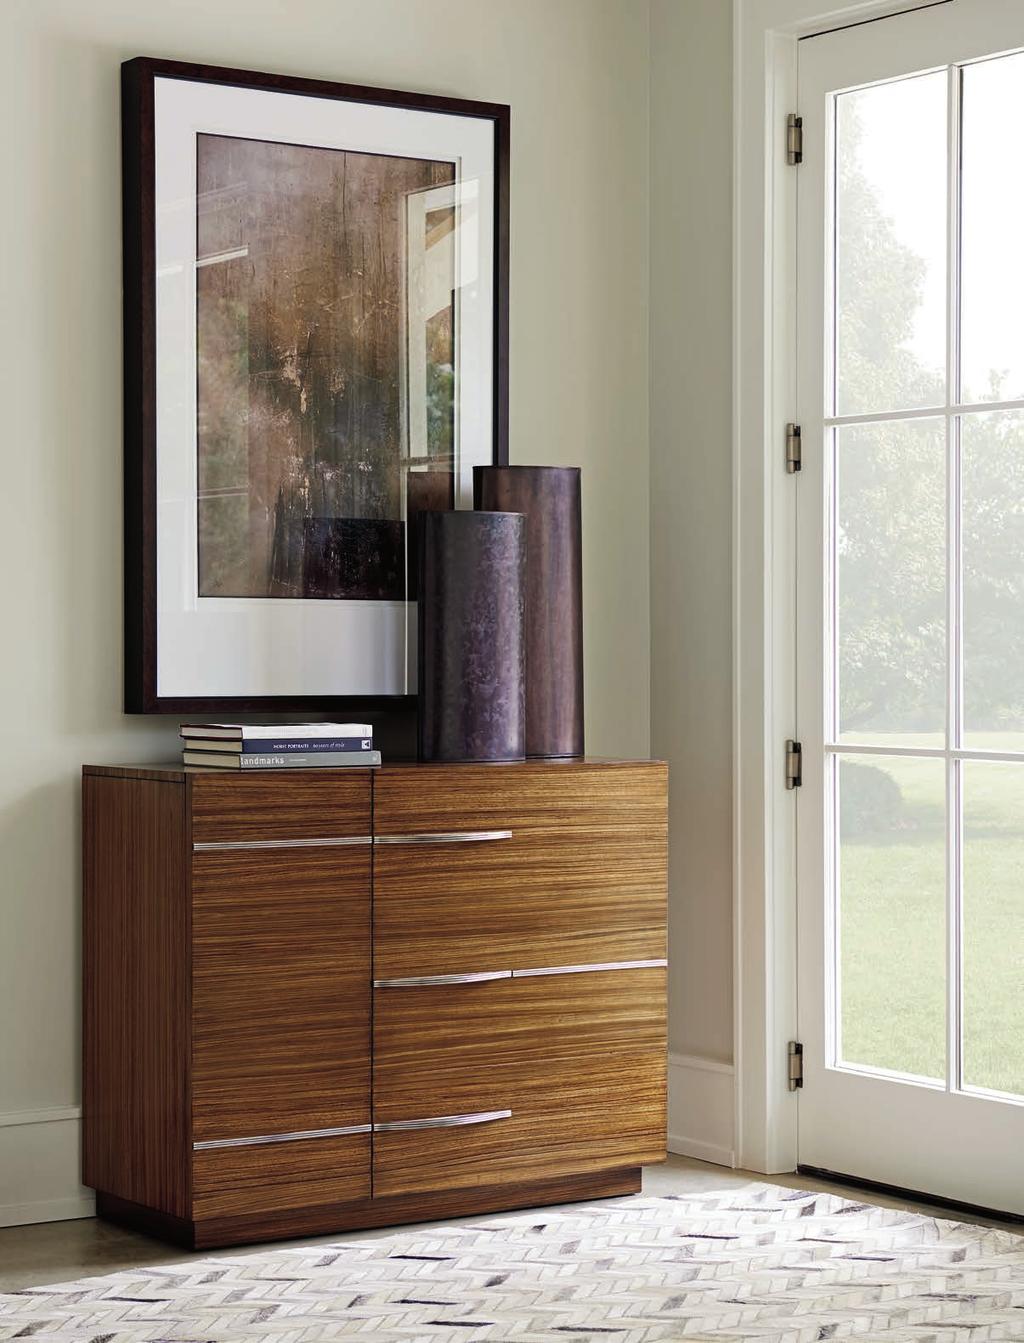 The Scofield chest highlights the visual impact of asymmetry in contemporary design.